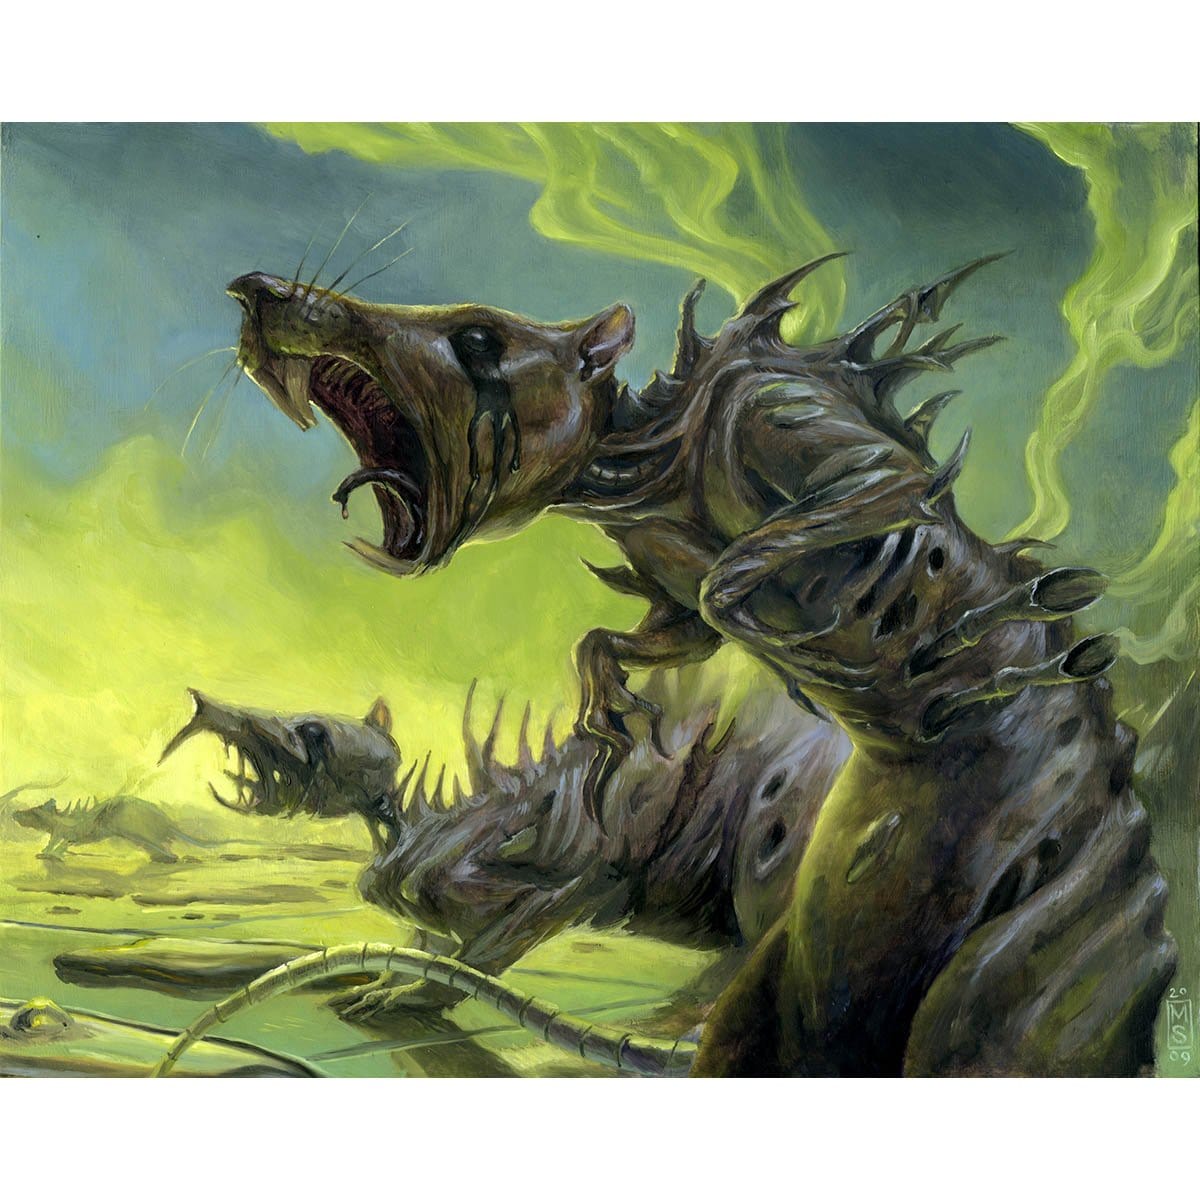 Ichor Rats Print - Print - Original Magic Art - Accessories for Magic the Gathering and other card games